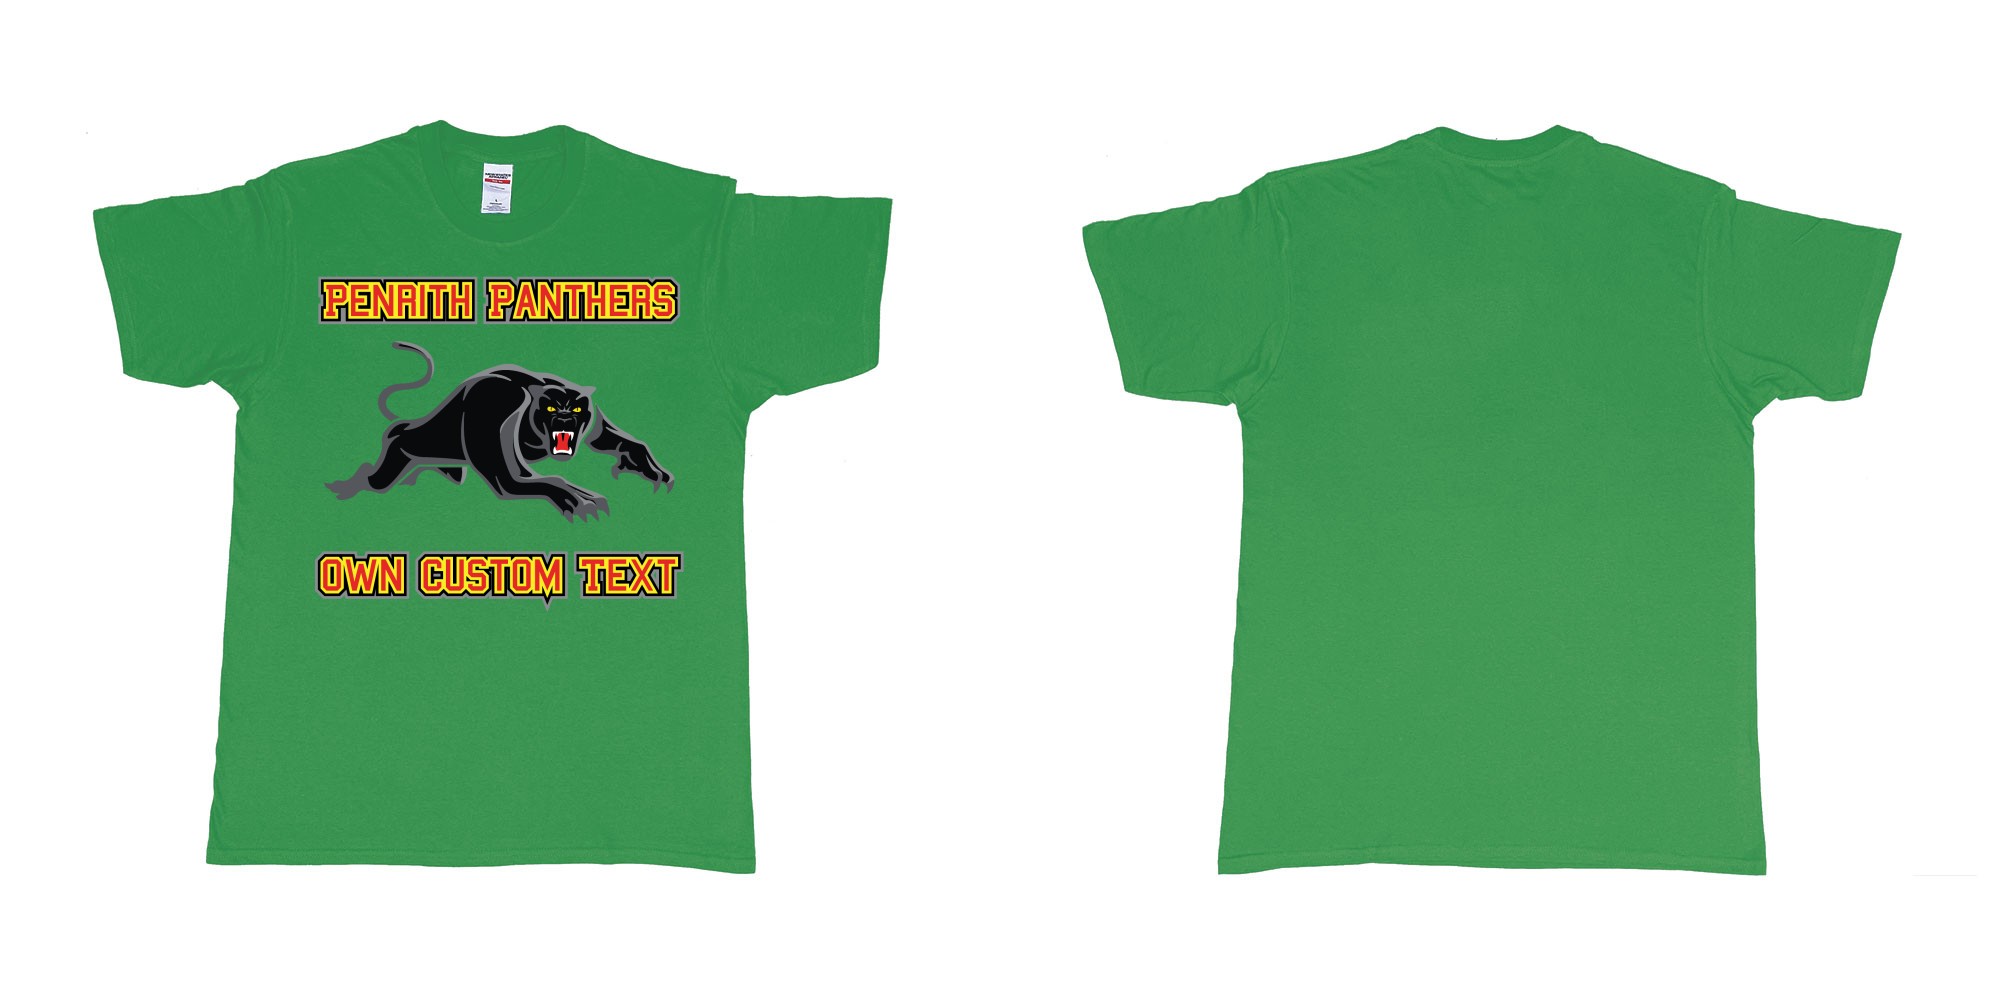 Custom tshirt design penrith panthers logo on demand custom printing in fabric color irish-green choice your own text made in Bali by The Pirate Way